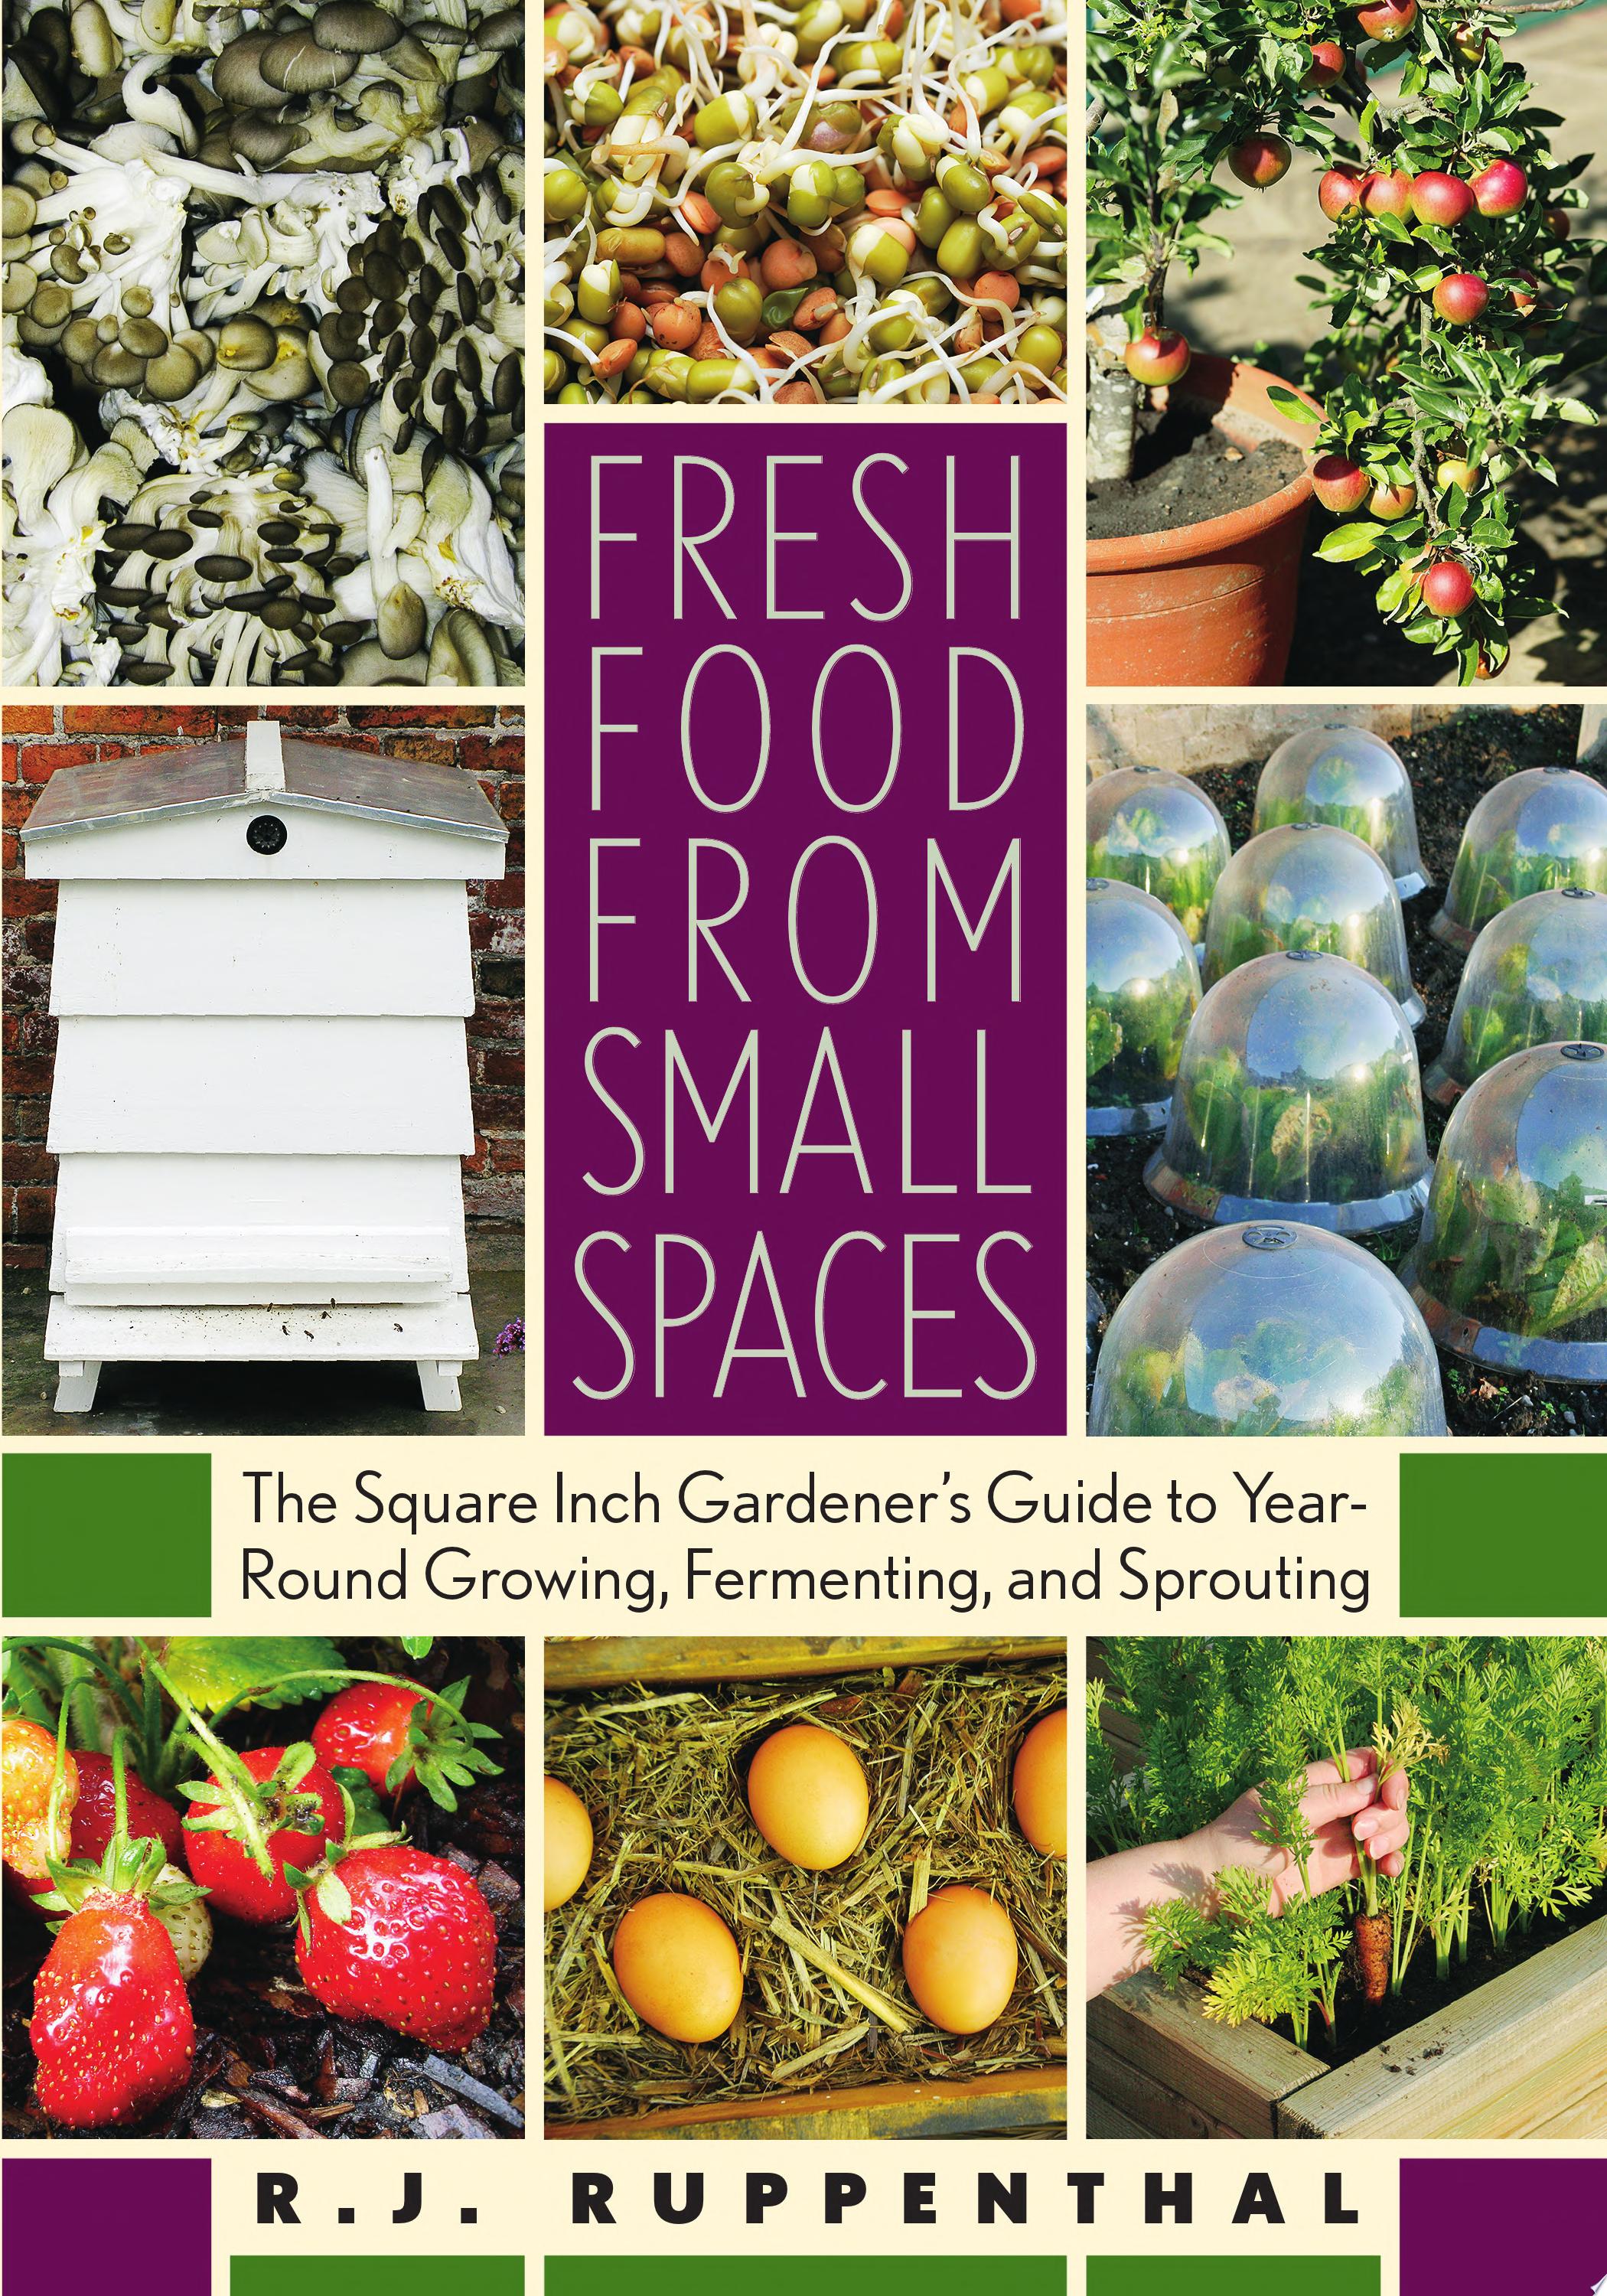 Image for "Fresh Food from Small Spaces"